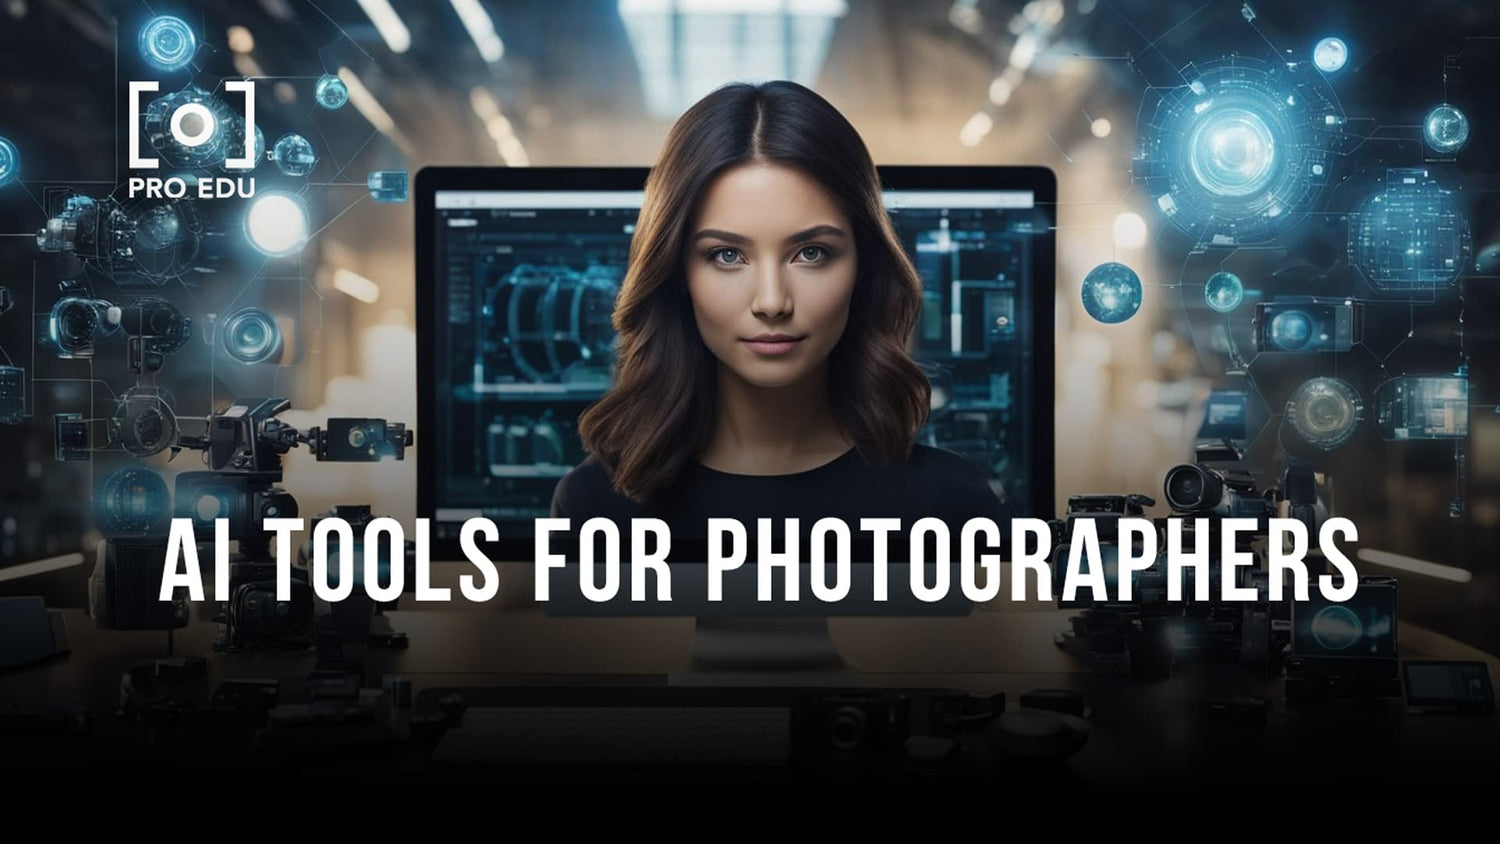 AI tools for photographers for editing visual pro edu guide